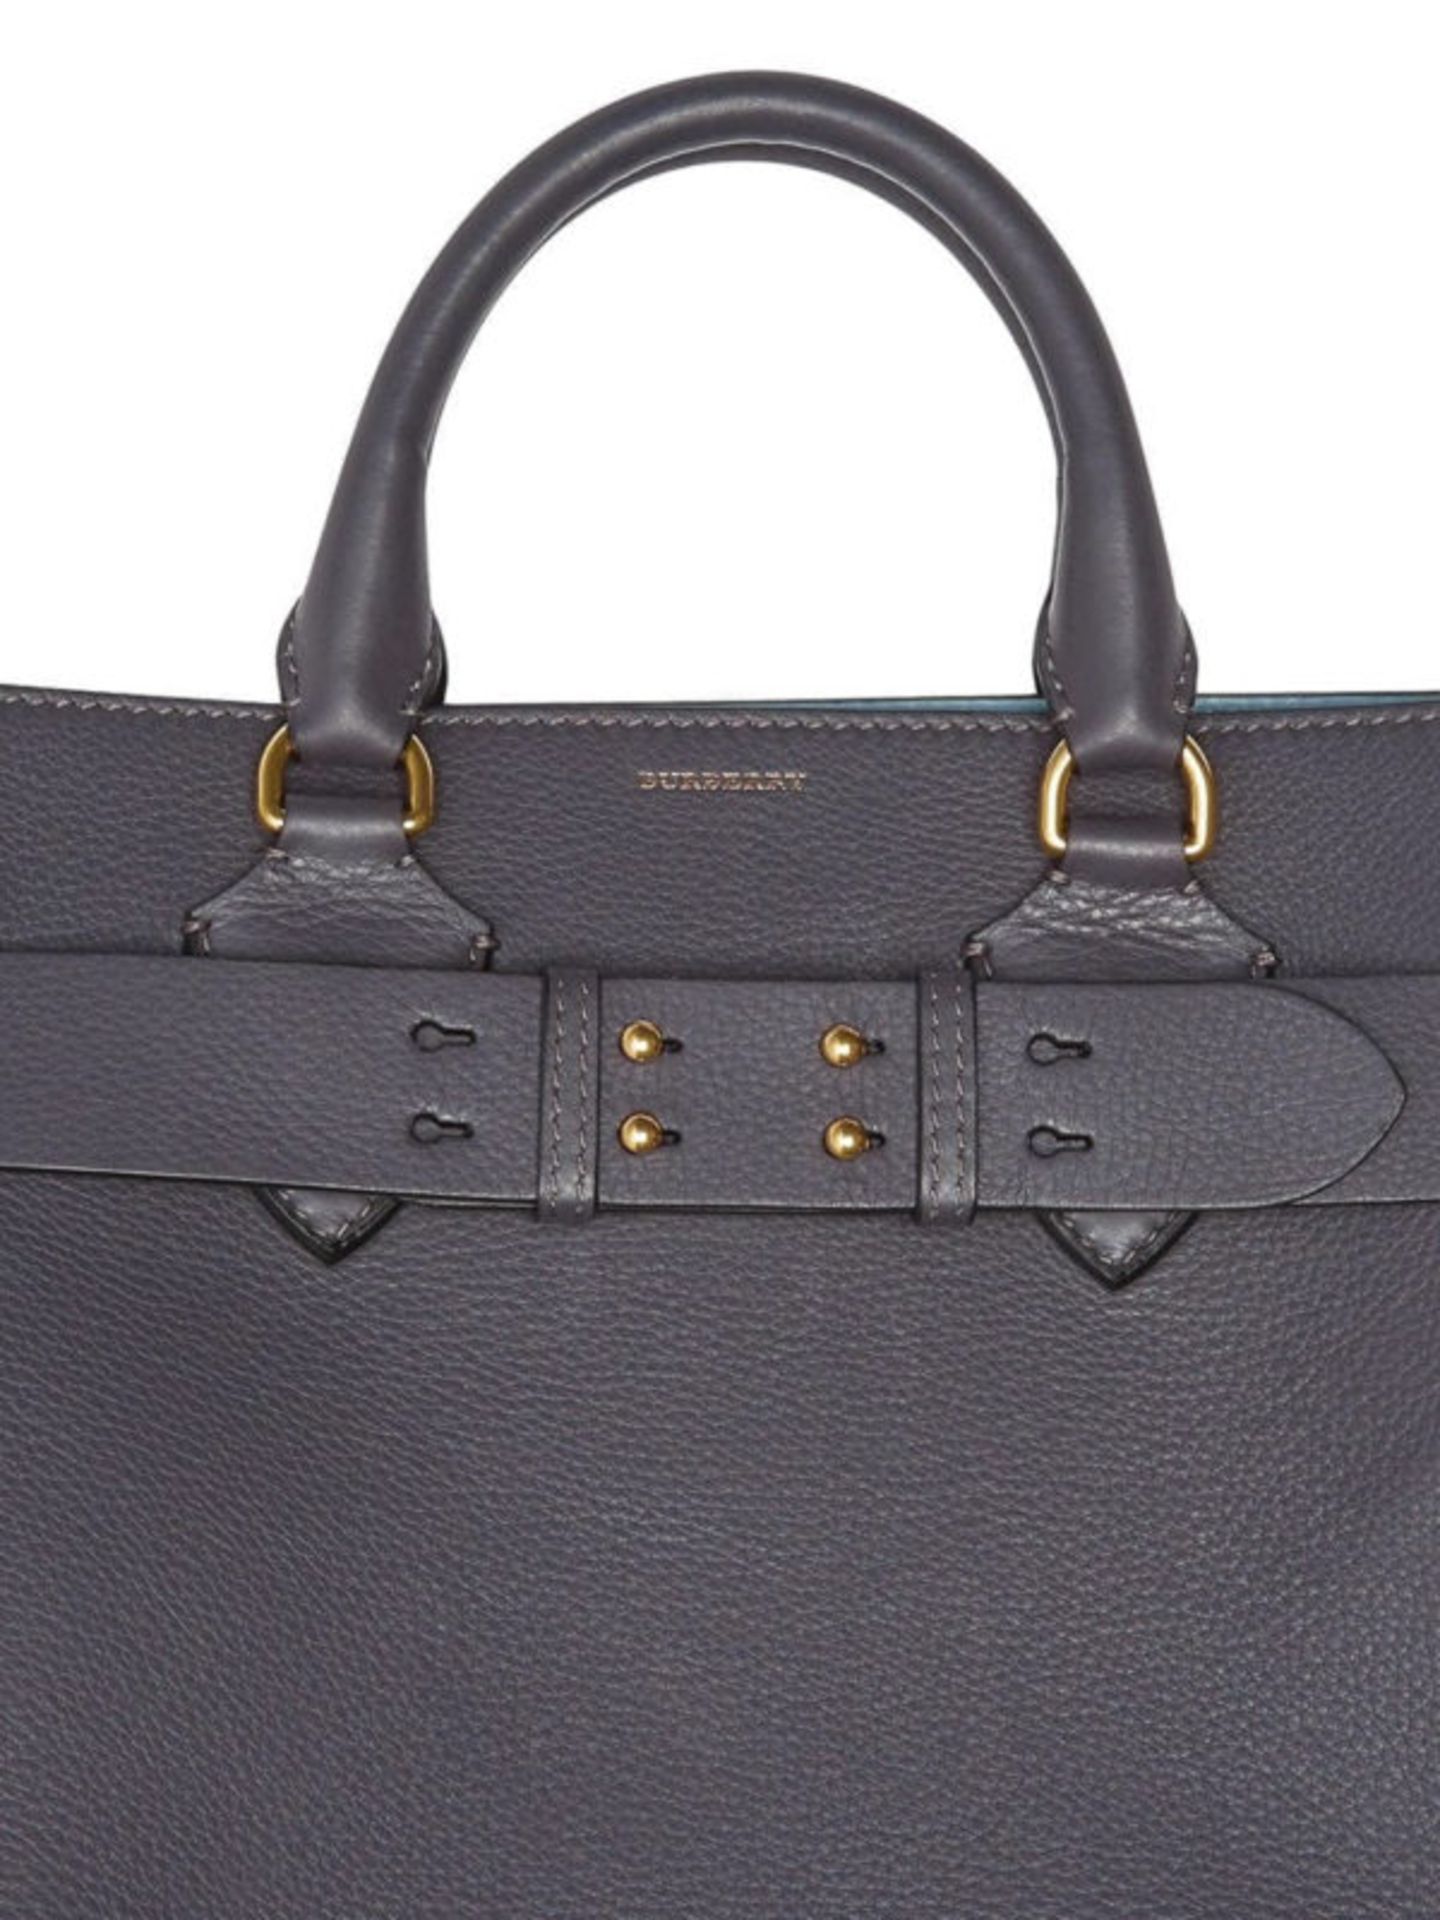 Genuine Burberry The Medium leather Belt Bag. Charcoal grey and baby blue. - Image 3 of 13